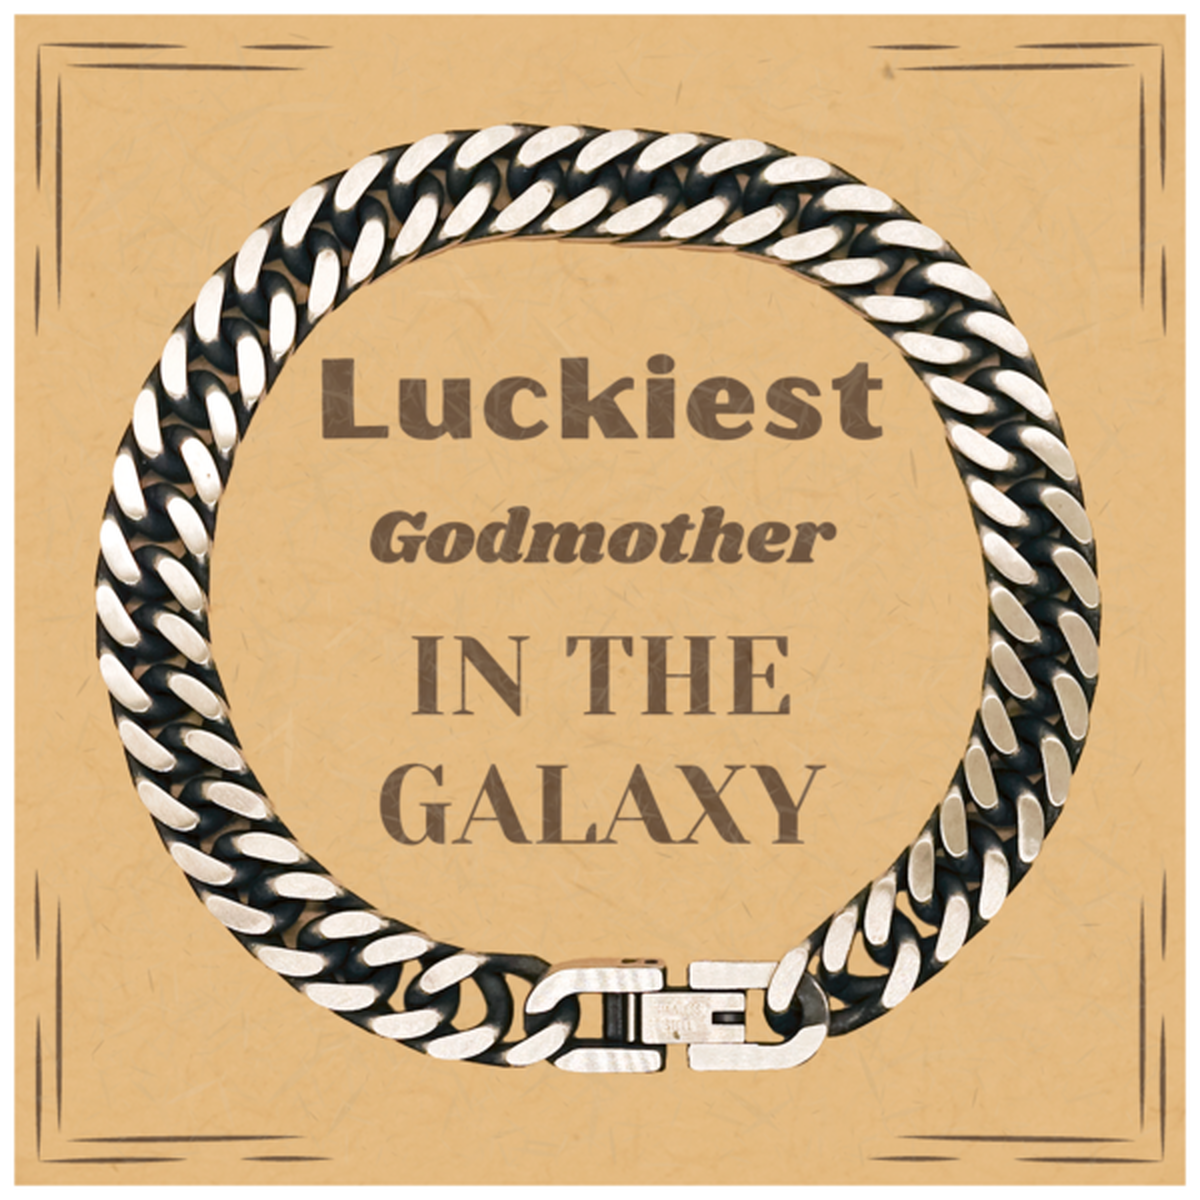 Luckiest Godmother in the Galaxy, To My Godmother Message Card Gifts, Christmas Godmother Cuban Link Chain Bracelet Gifts, X-mas Birthday Unique Gifts For Godmother Men Women